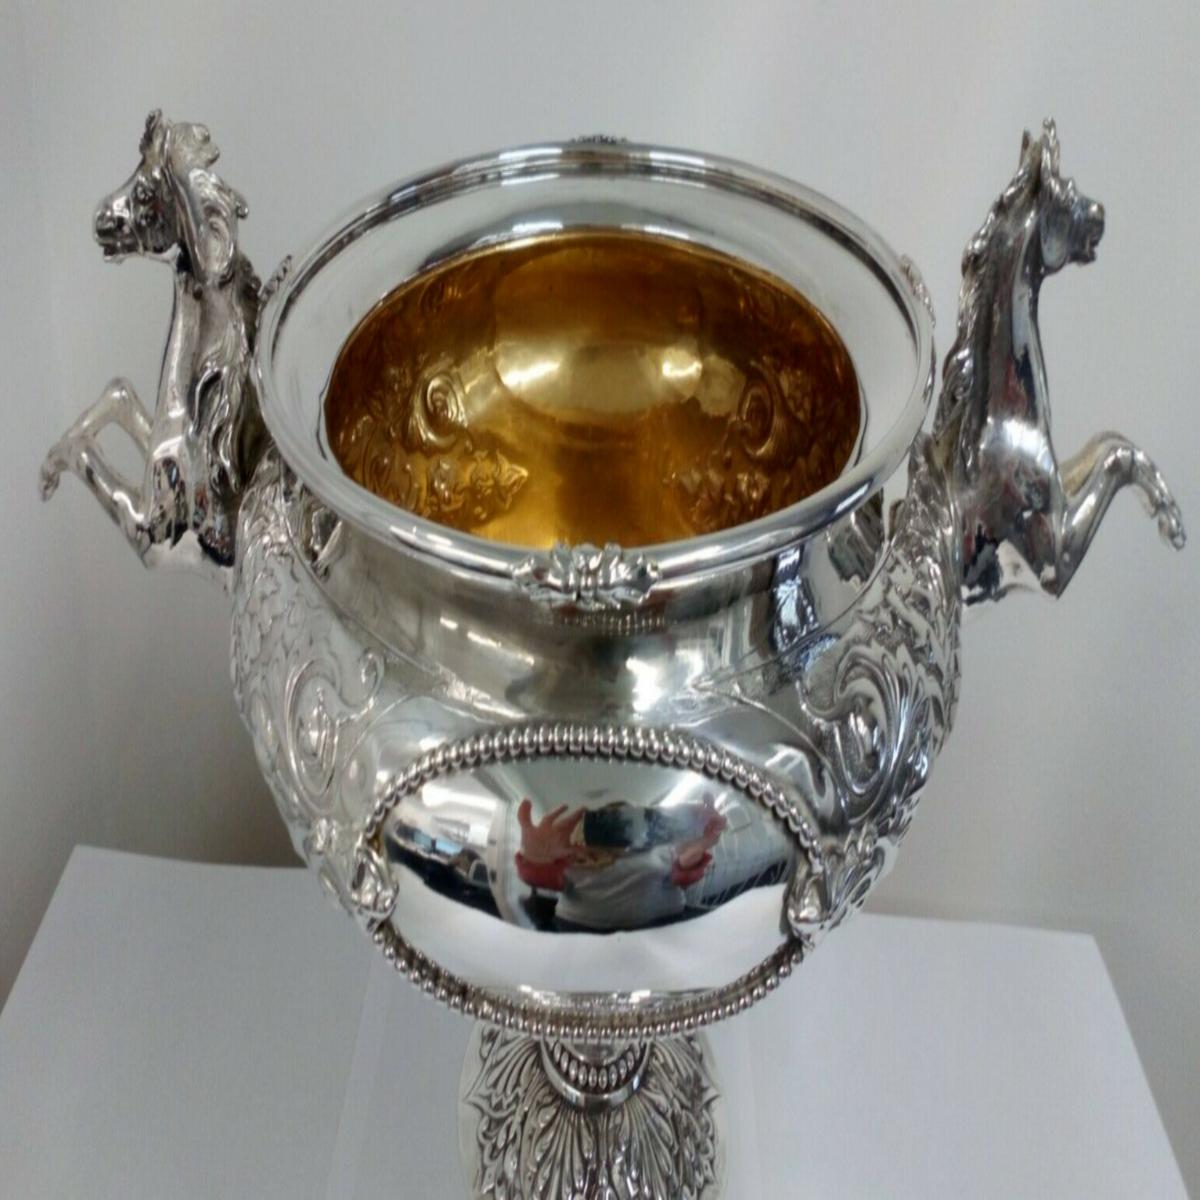 Large Victorian Sterling Silver Riding Trophy by Robert Hennell III from 1867

In excellent condition, this is an impressive Victorian silver trophy centrepiece with two horses heads and galloping leg handles.

The bowl is decorated with scrolling,